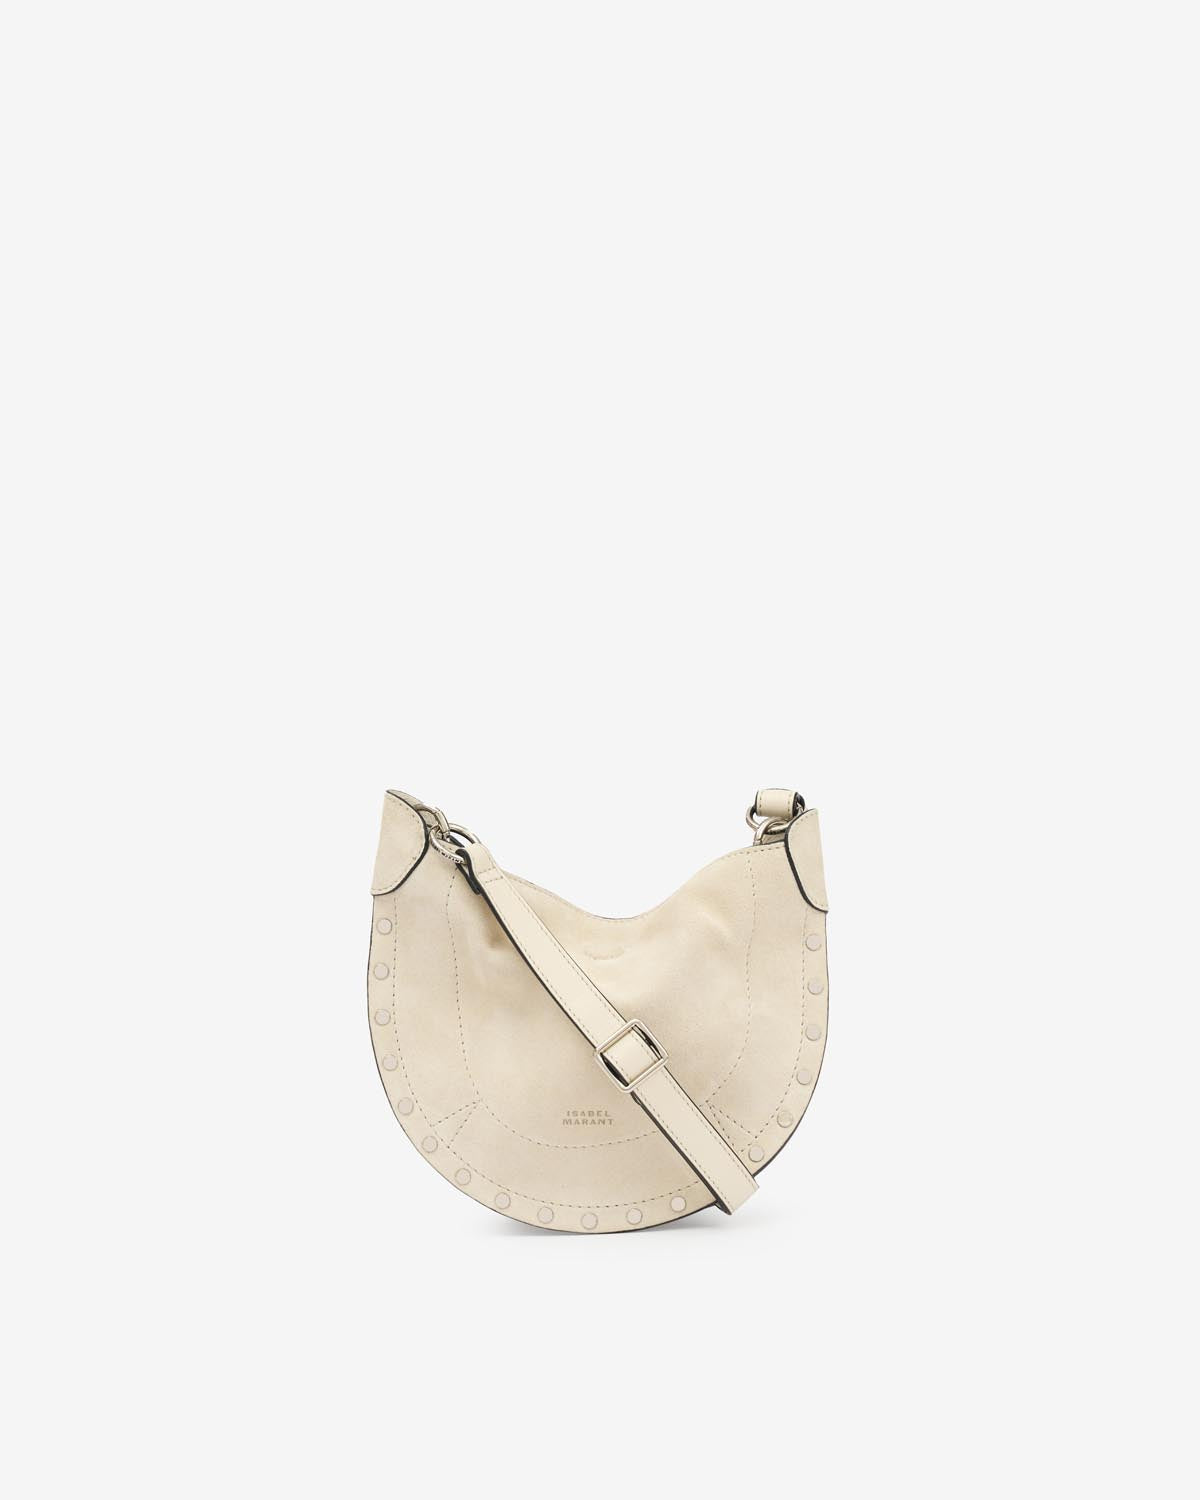 Clutches and Small Leather Goods | ISABEL MARANT Official